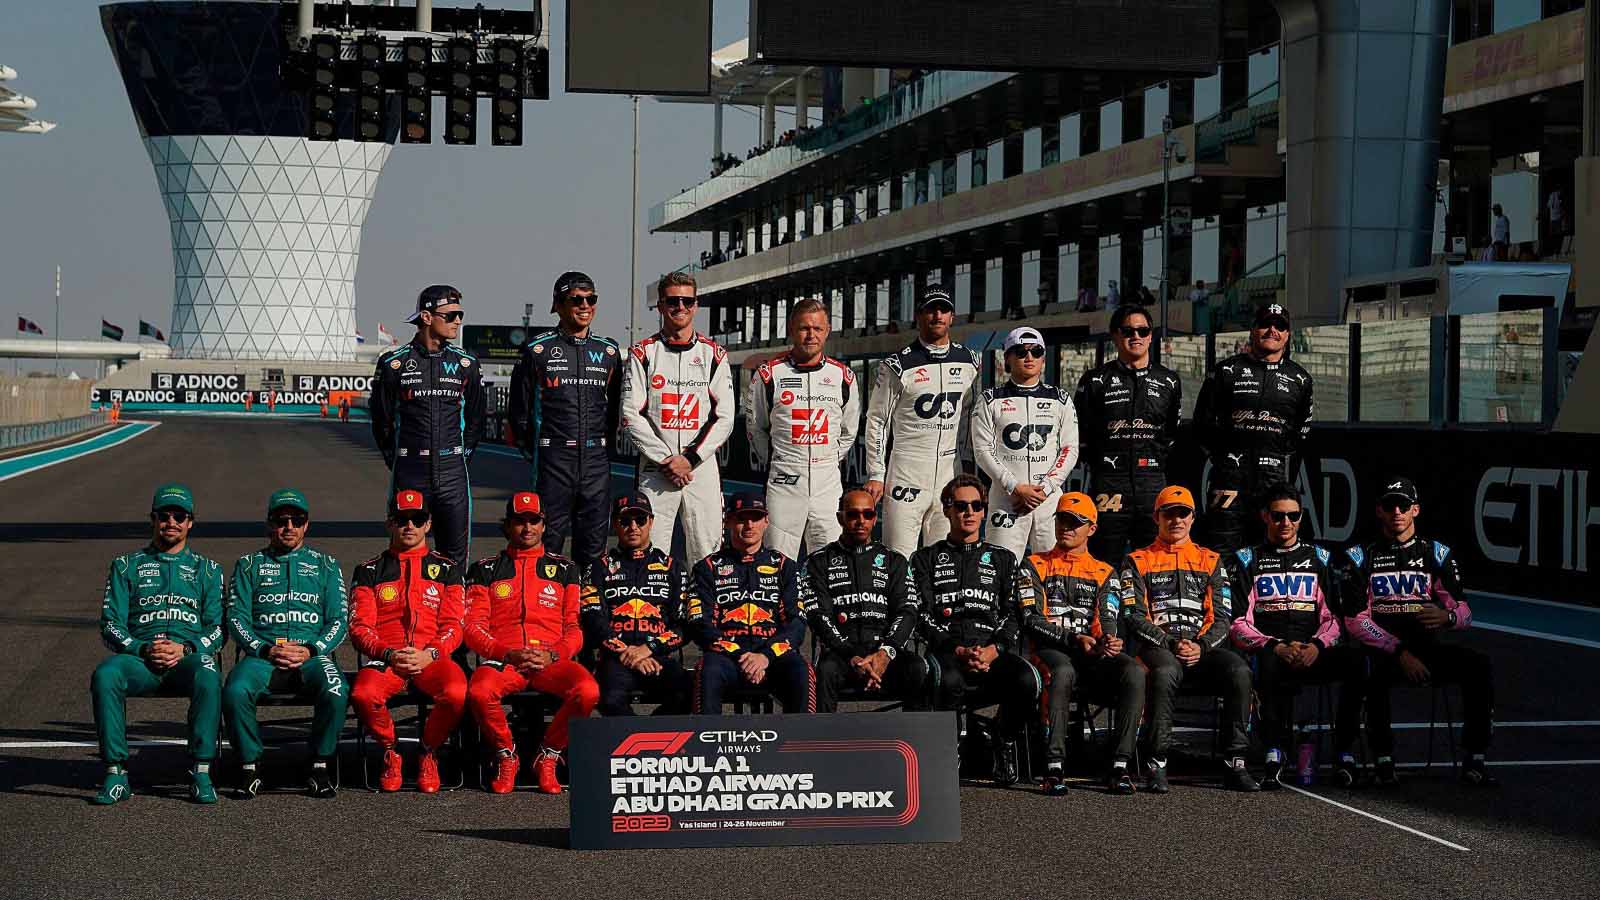 2024 F1 grid: all lineups and drivers for next Formula 1 season